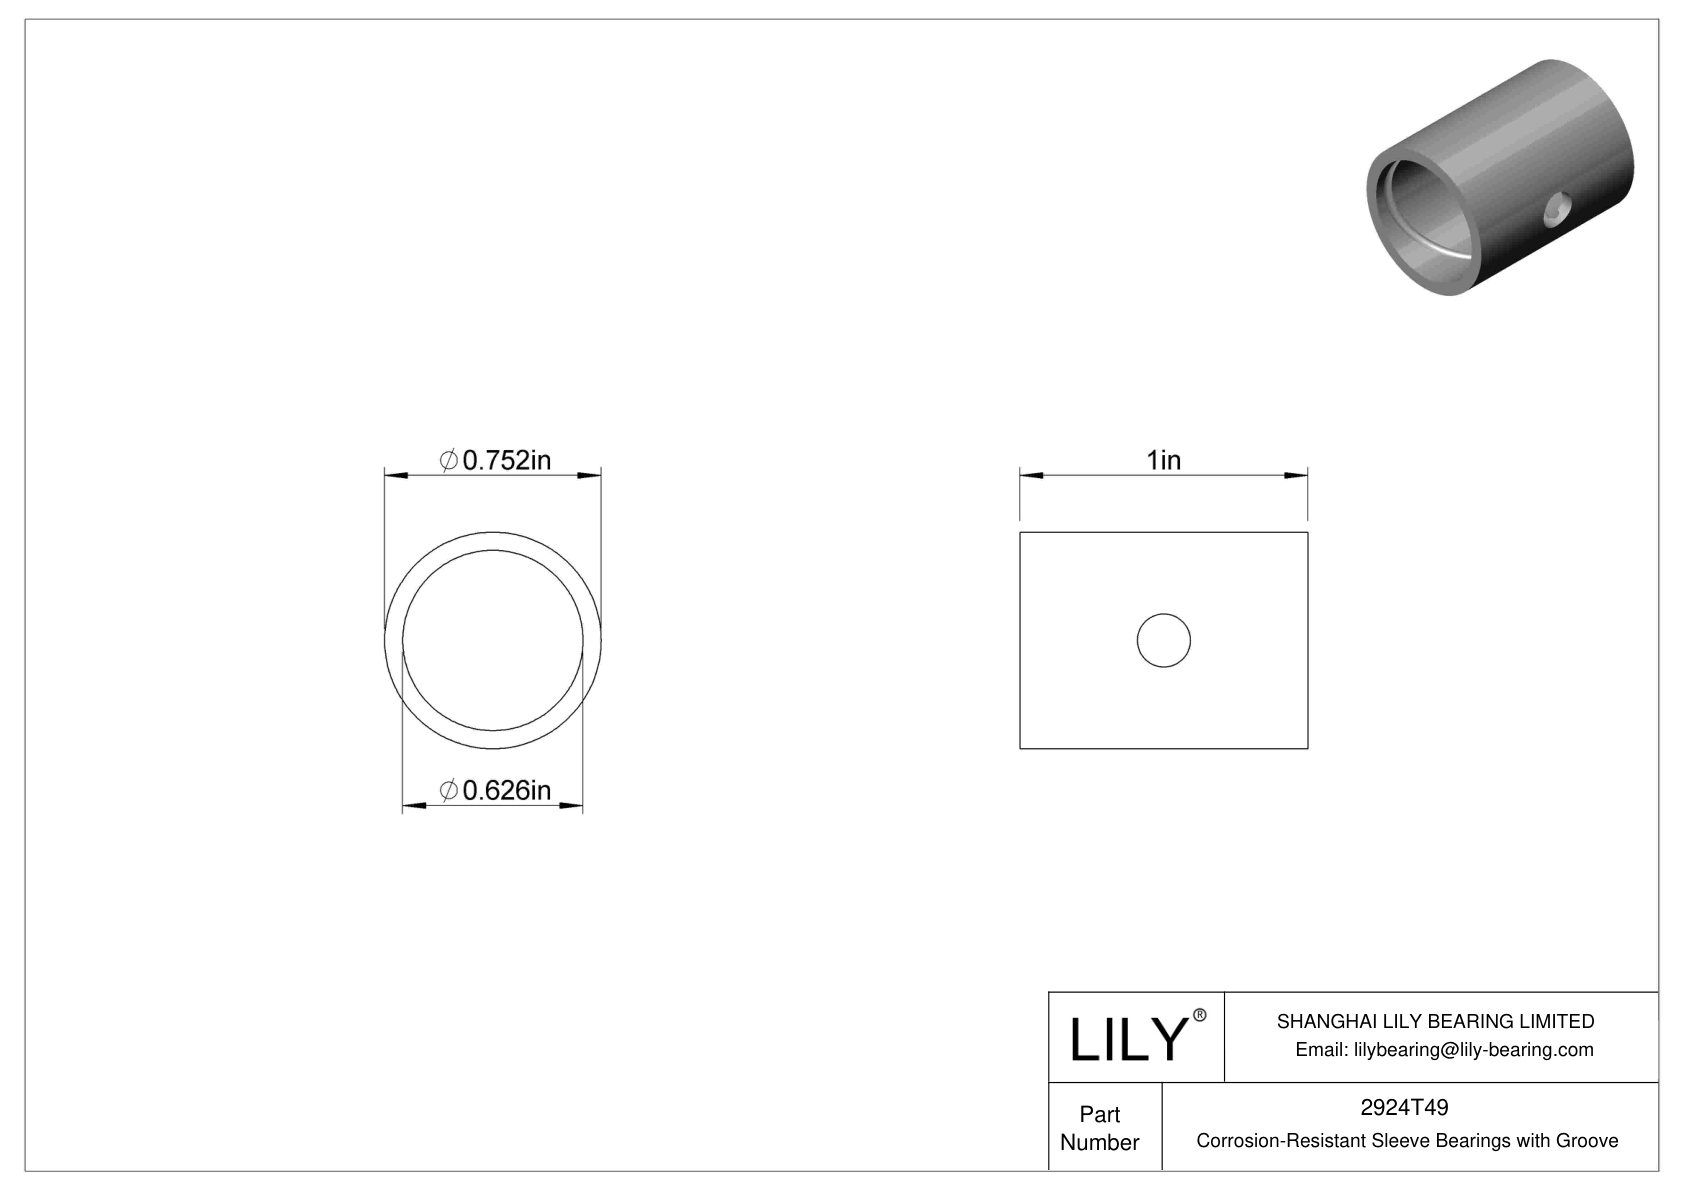 CJCETEJ Corrosion-Resistant Sleeve Bearings with Groove cad drawing